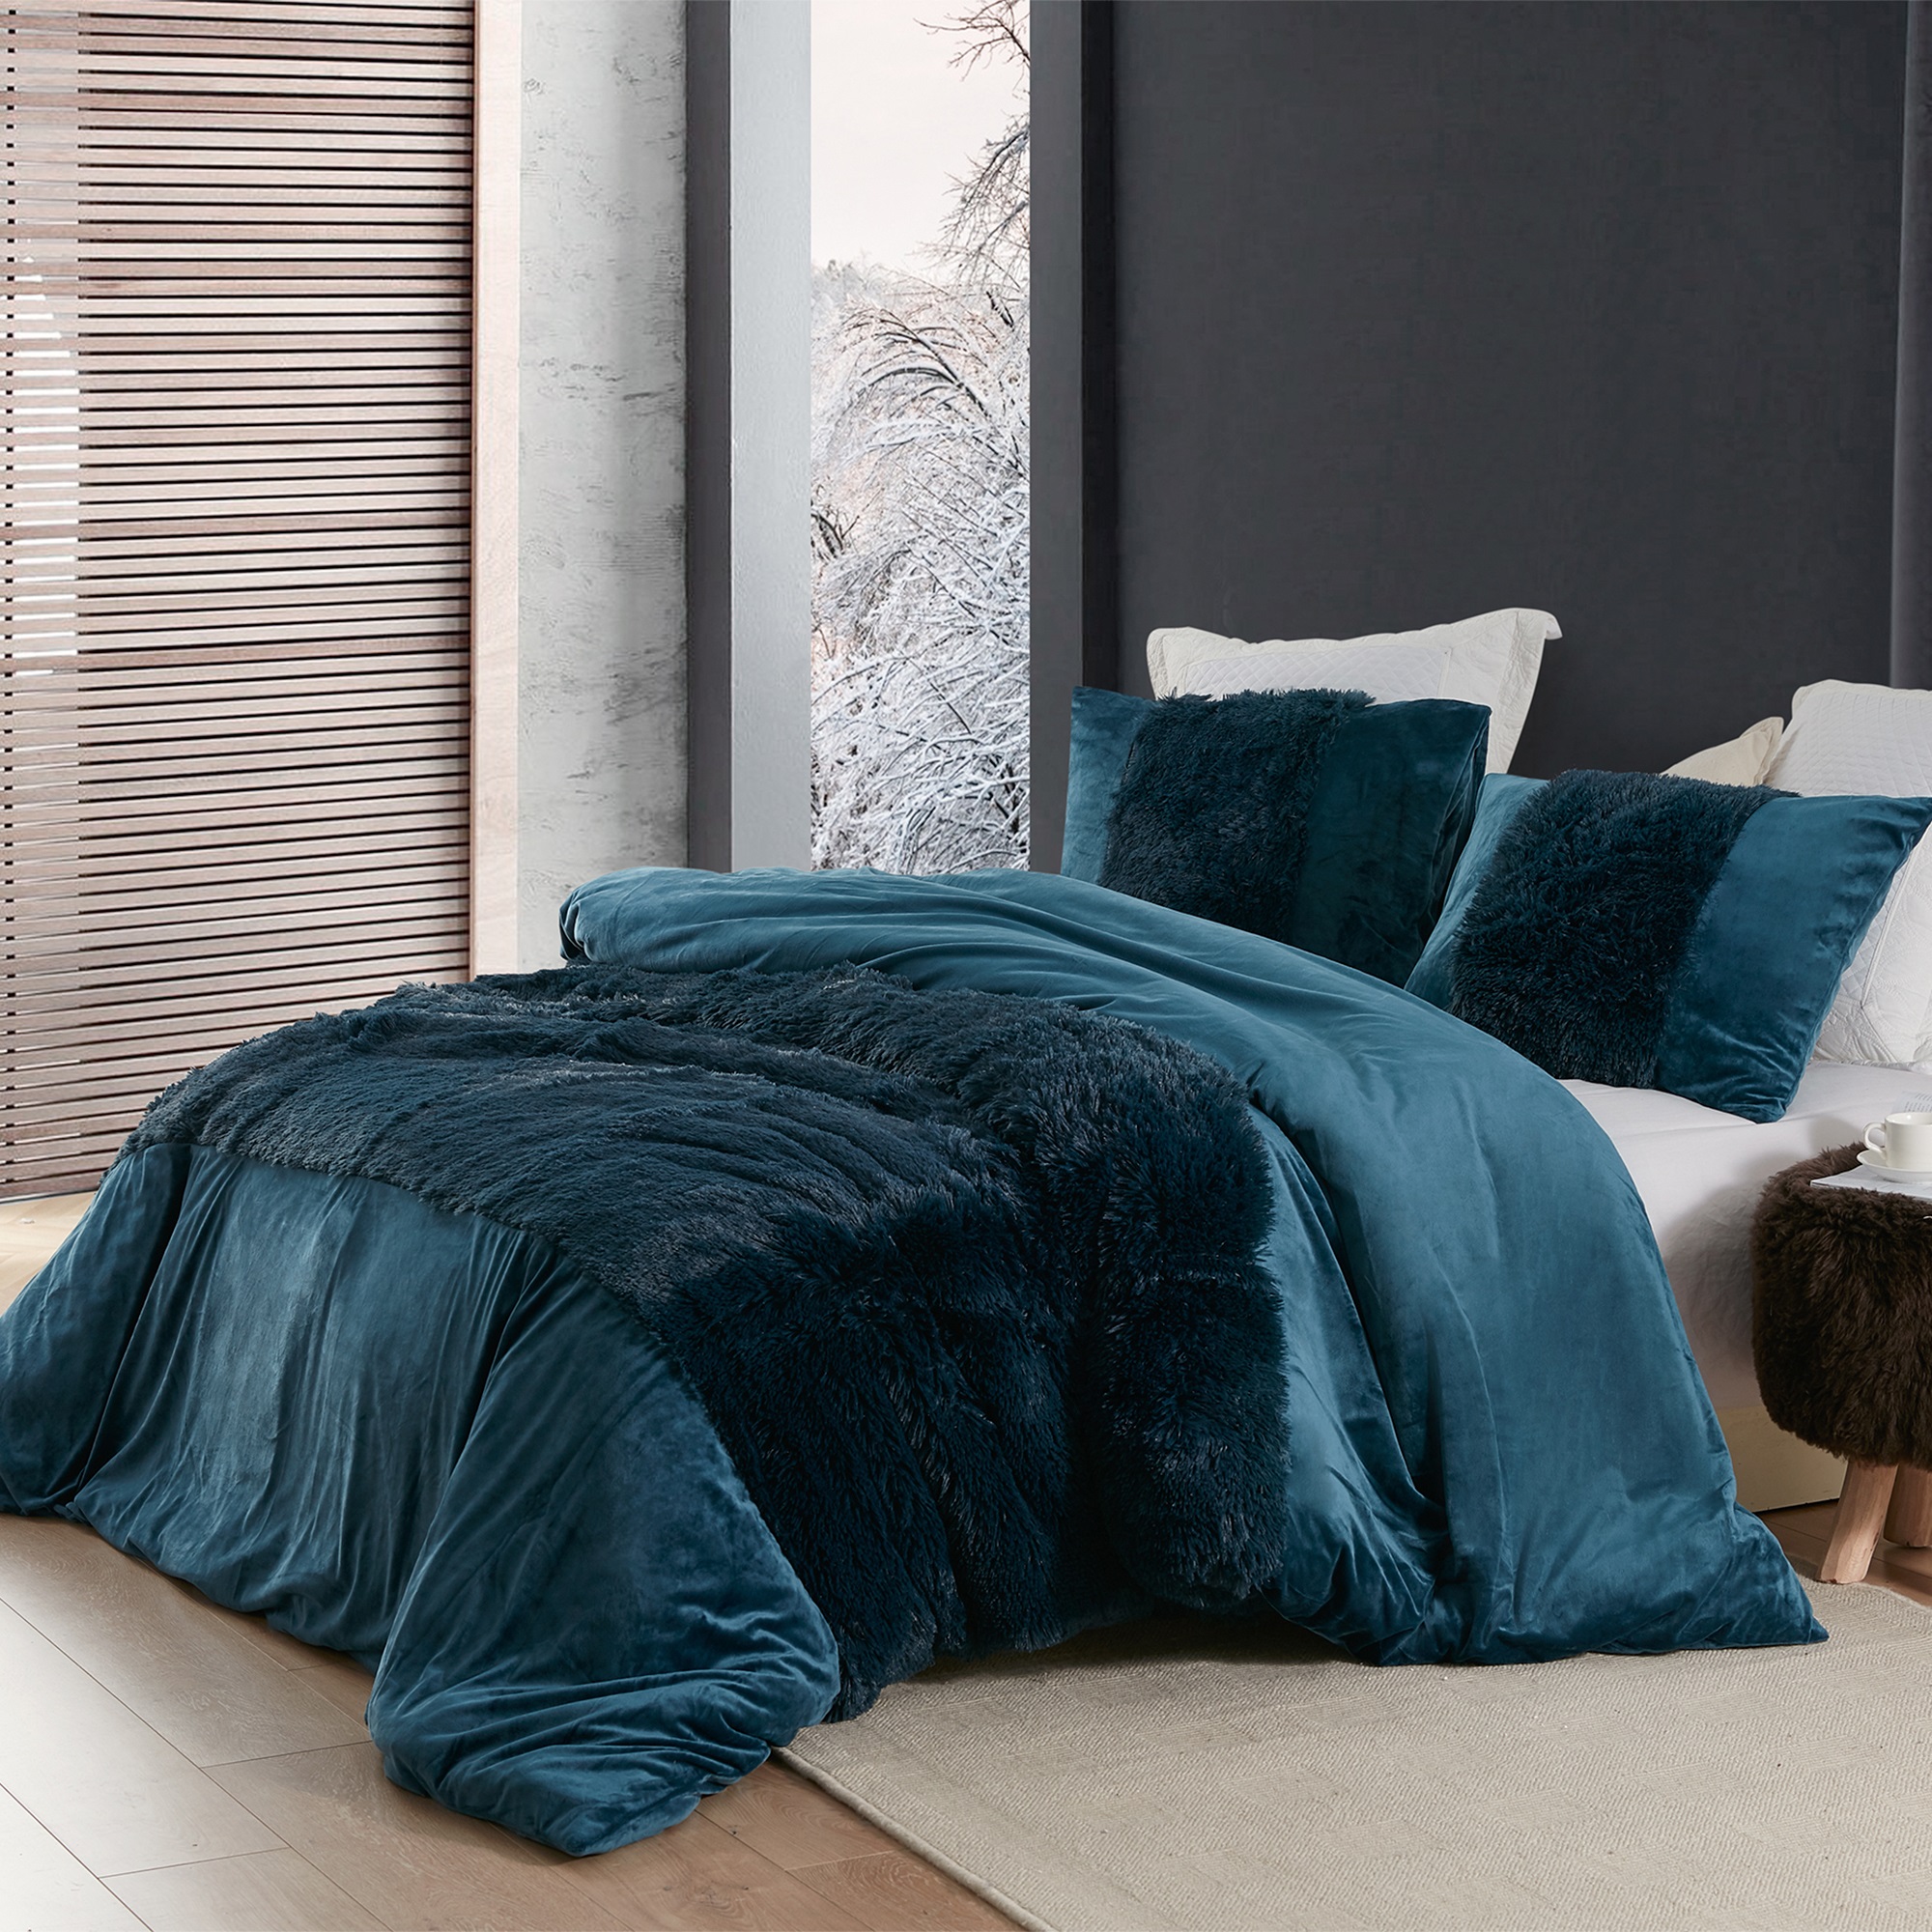 Coma Inducer® Duvet Cover - Are You Kidding? - Nightfall Navy